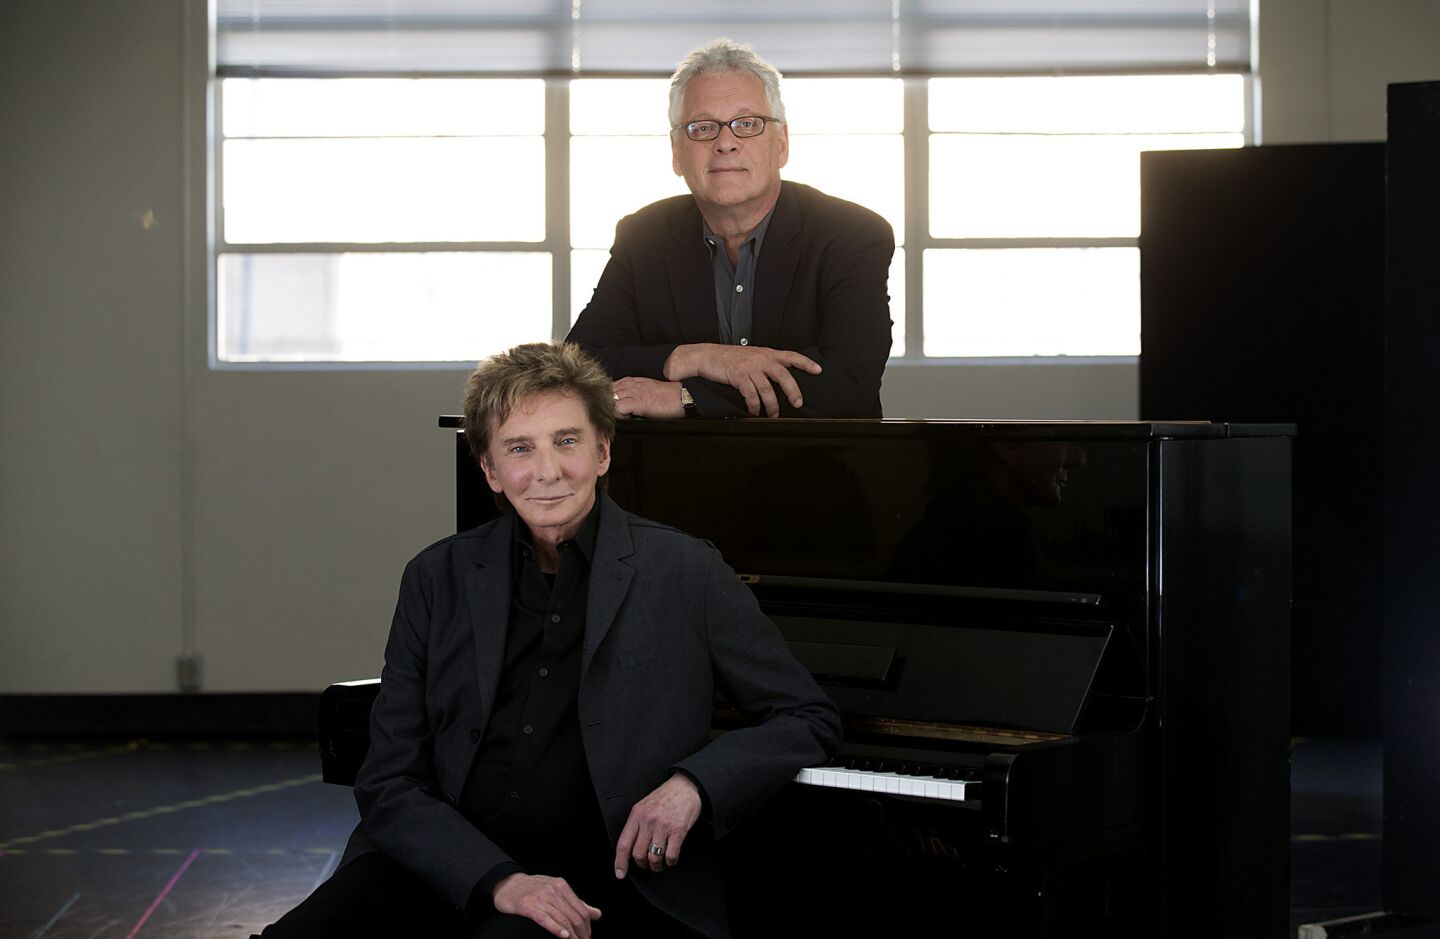 Singer-songwriter Barry Manilow, front, and writing partner Bruce Sussman at the Music Center Annex Complex. Their musical "Harmony" will be at the Ahmanson Theatre until April 13. REVIEW: Barry Manilow's 'Harmony' musical can sing but needs work